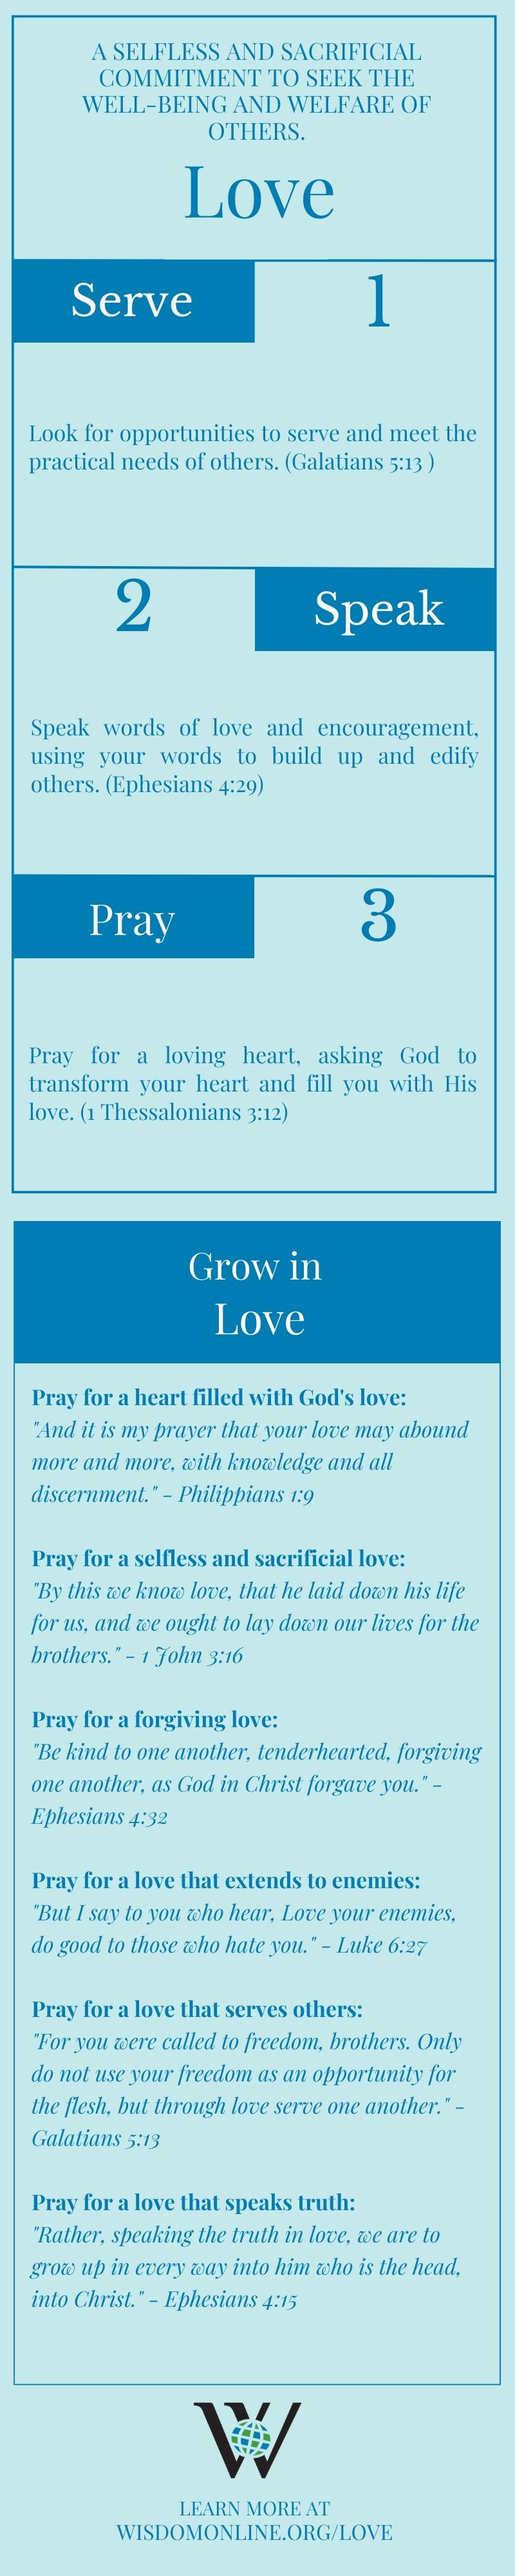 Infographic on the Biblical characteristic of Love